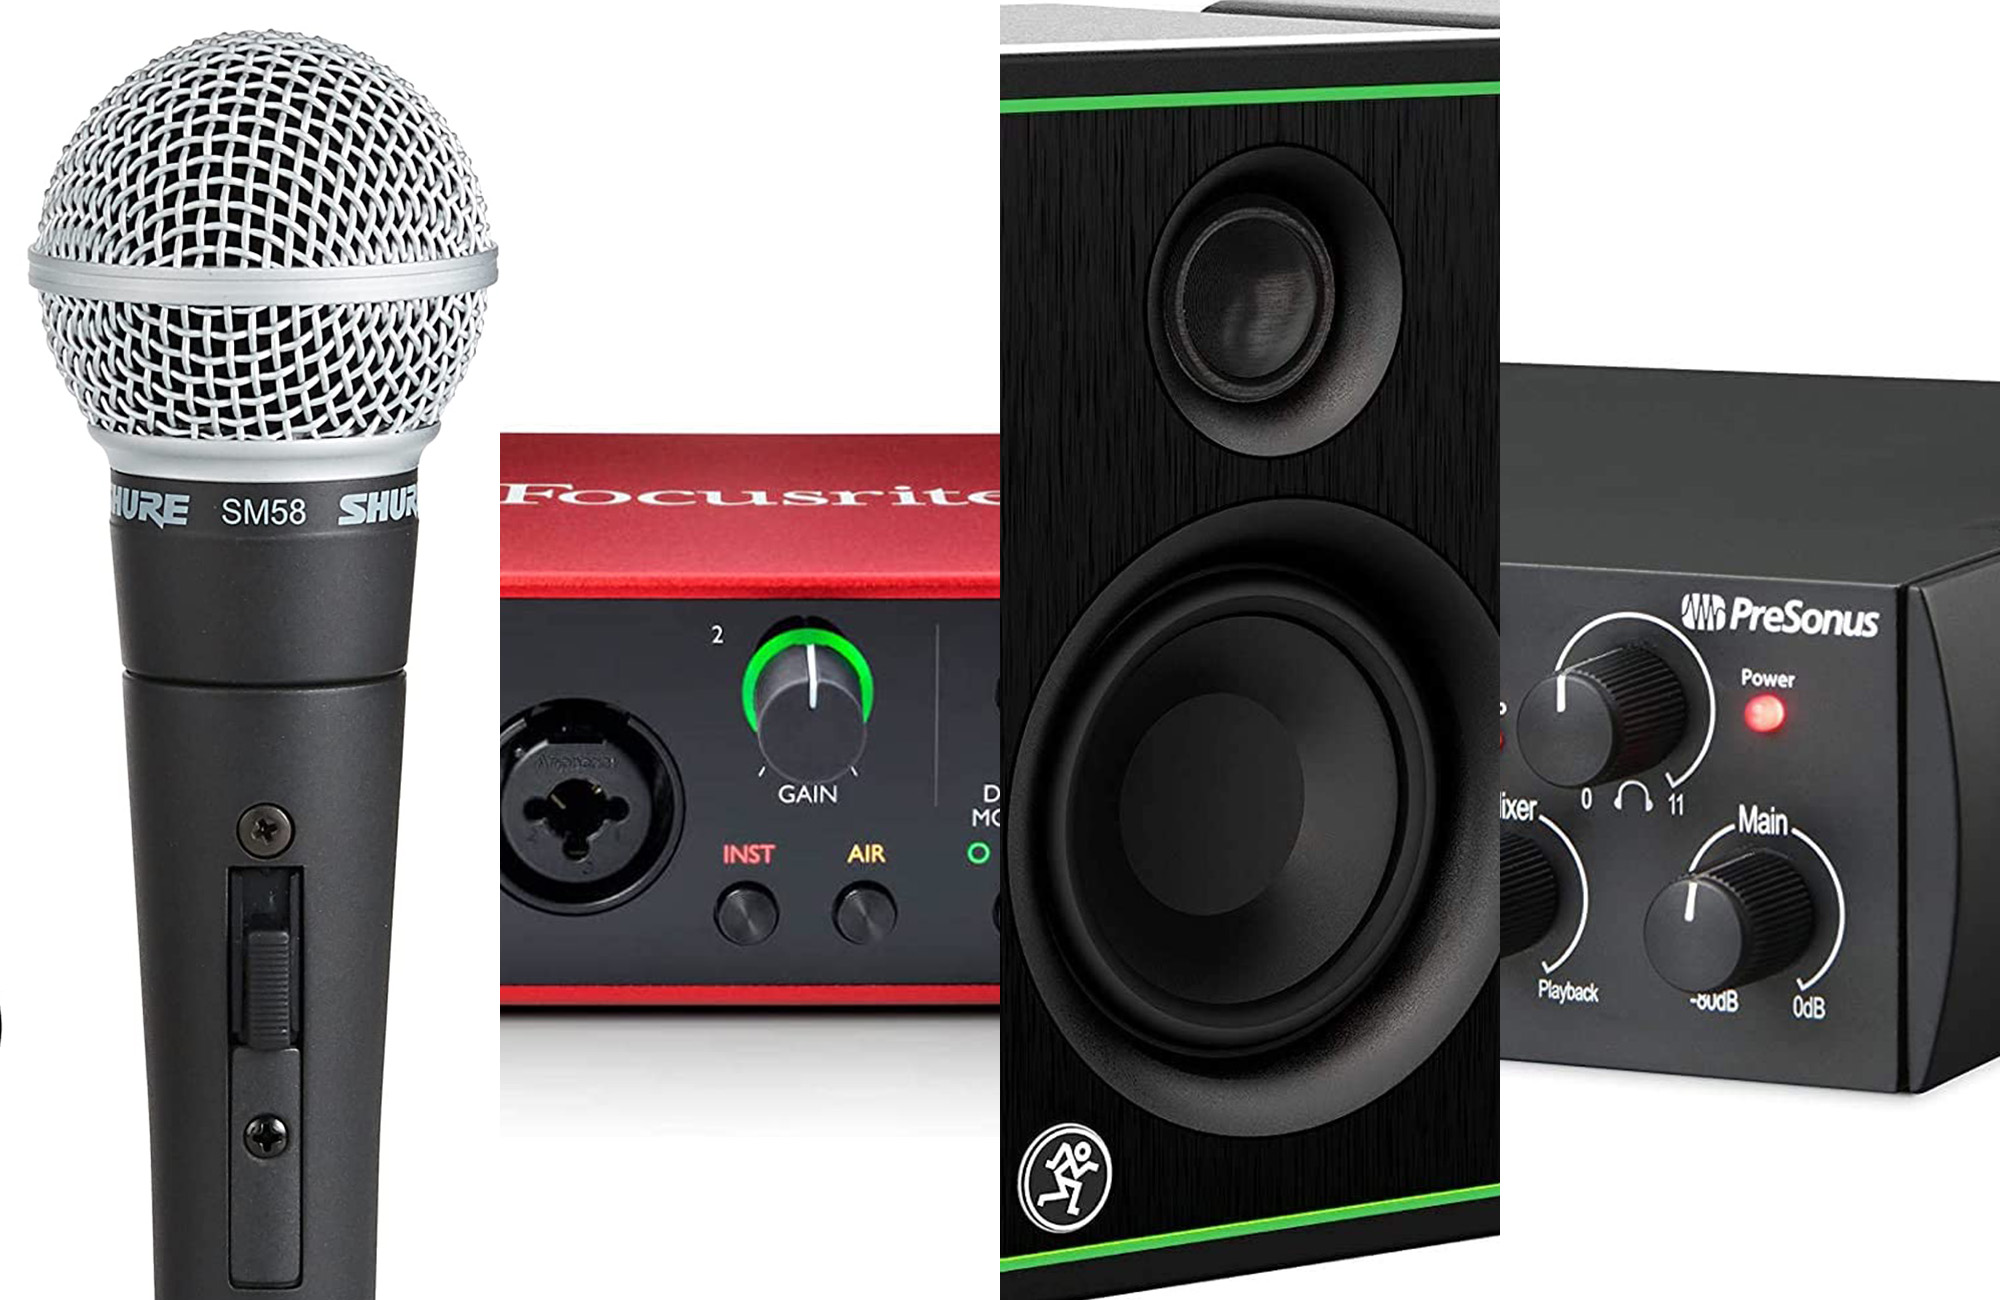 Build a home studio on a budget with early Black Friday Amazon audio deals